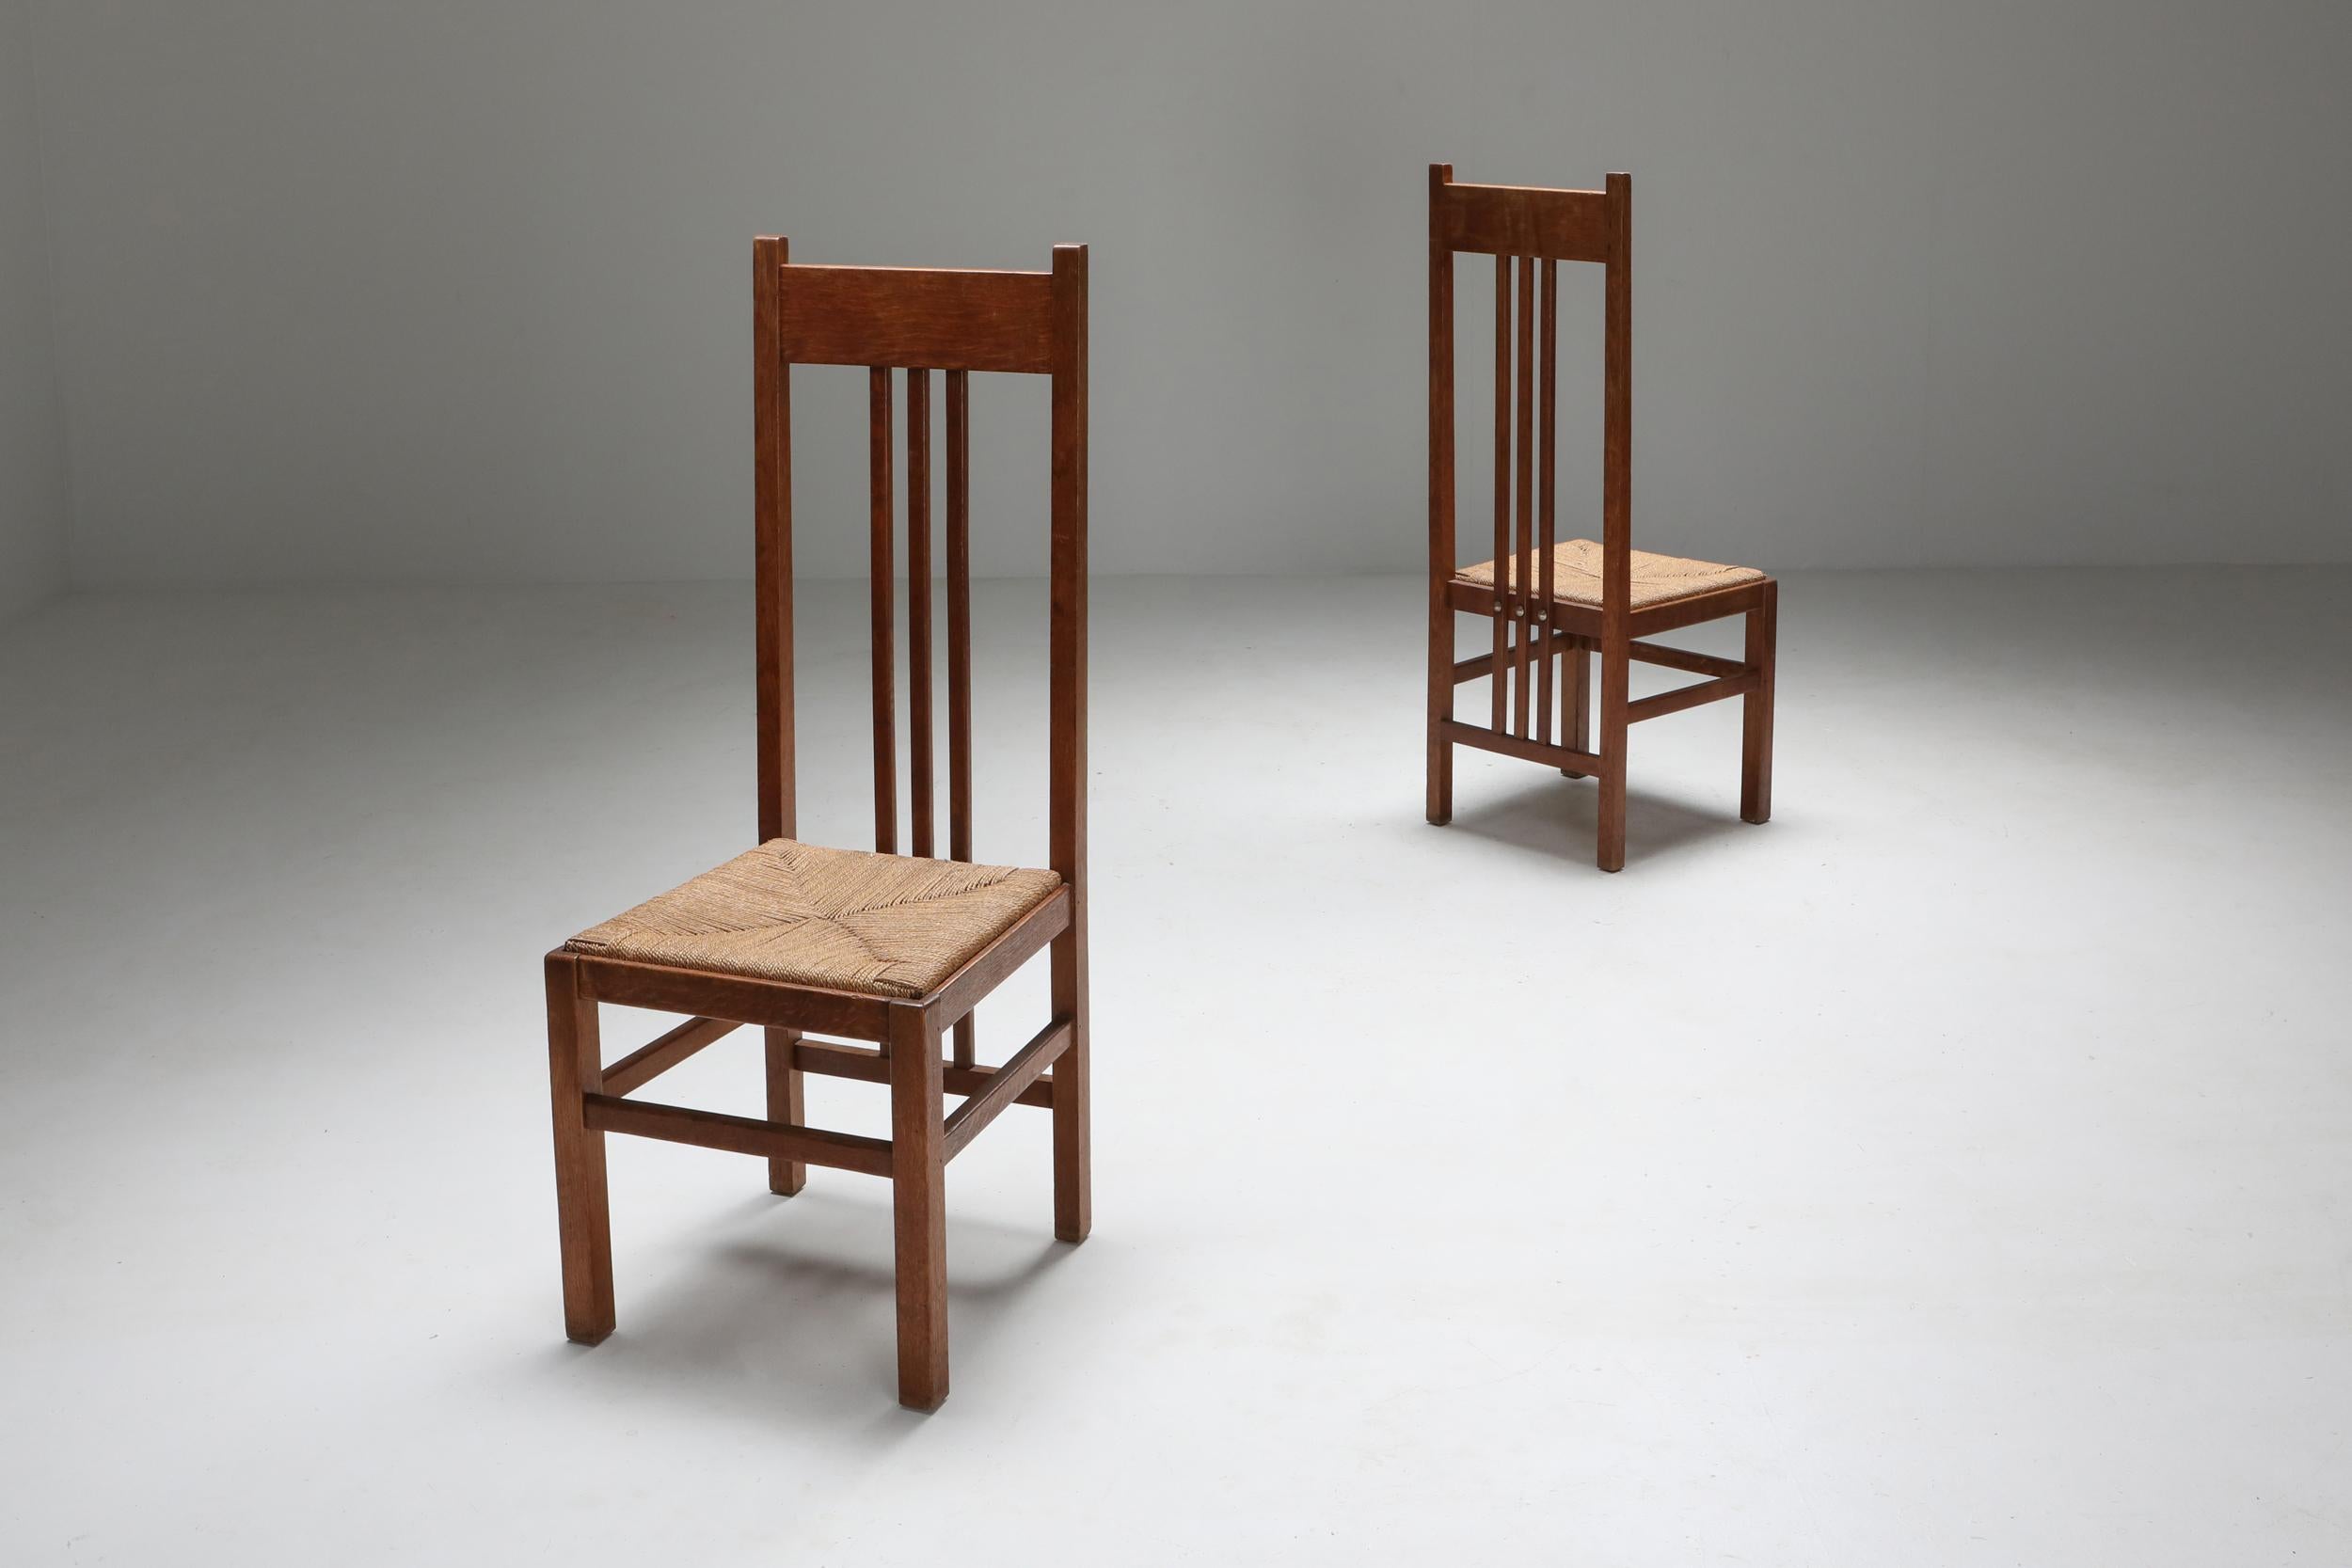 Early 20th-century chairs, hailing from the distinguished Hague School in the Netherlands, dating back to the 1920s. With a pure and simple beauty, these chairs epitomize the essence of modern antique design, offering a glimpse into the past while